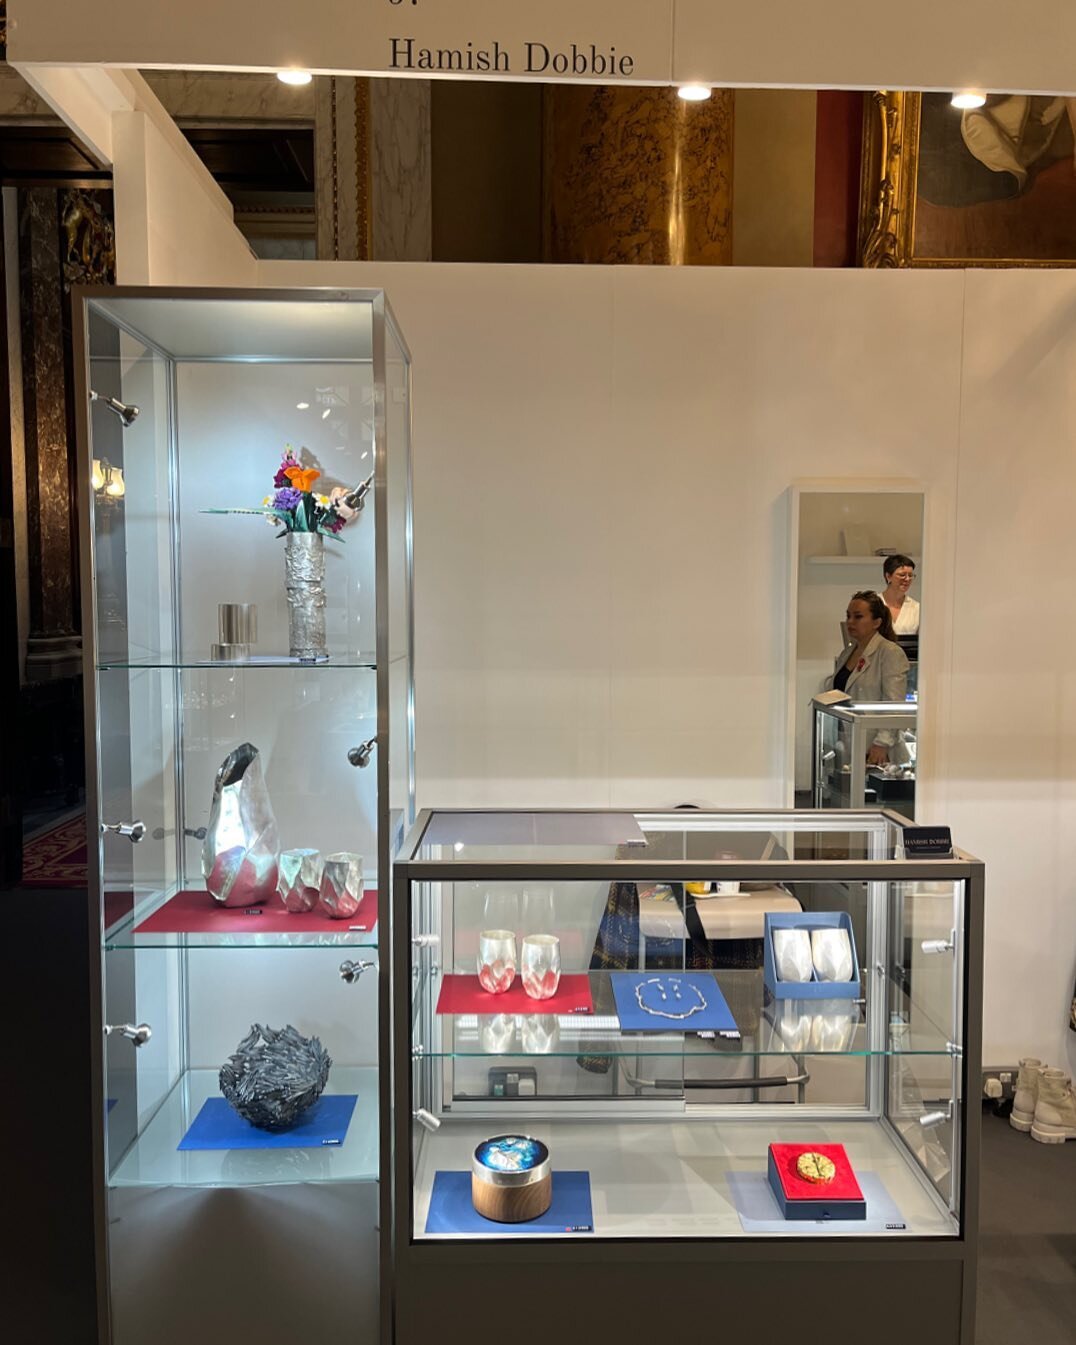 Goldsmiths&rsquo; Fair 2023 is open and a wonderful start! 

Tuesday- Saturday 11am-6:30pm Sunday 11am-4:30pm

#silver #silversmithing #goldsmithsfair #handmade #homedecor